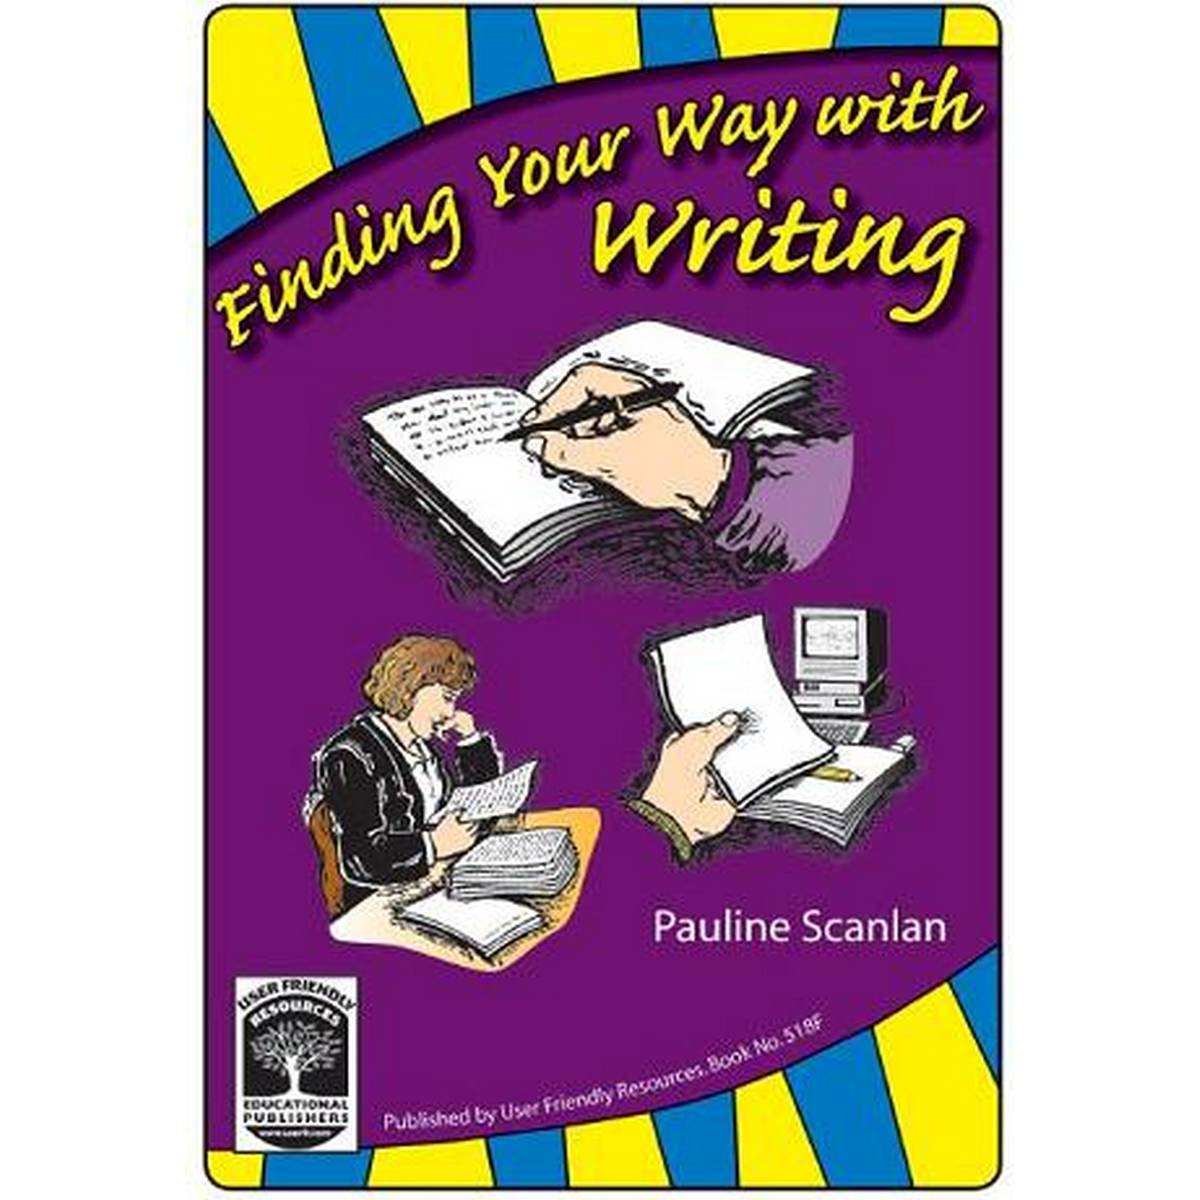 Finding Your Way with Writing